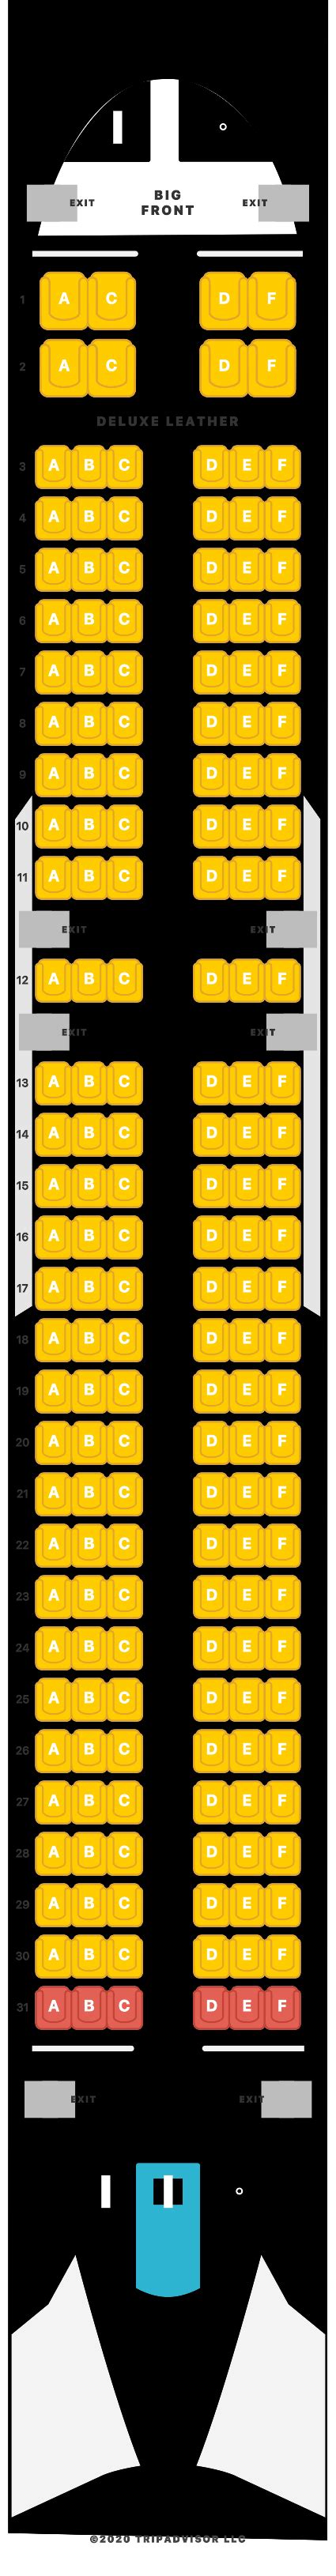 Spirit Airlines Seating Chart A320 Bruin Blog